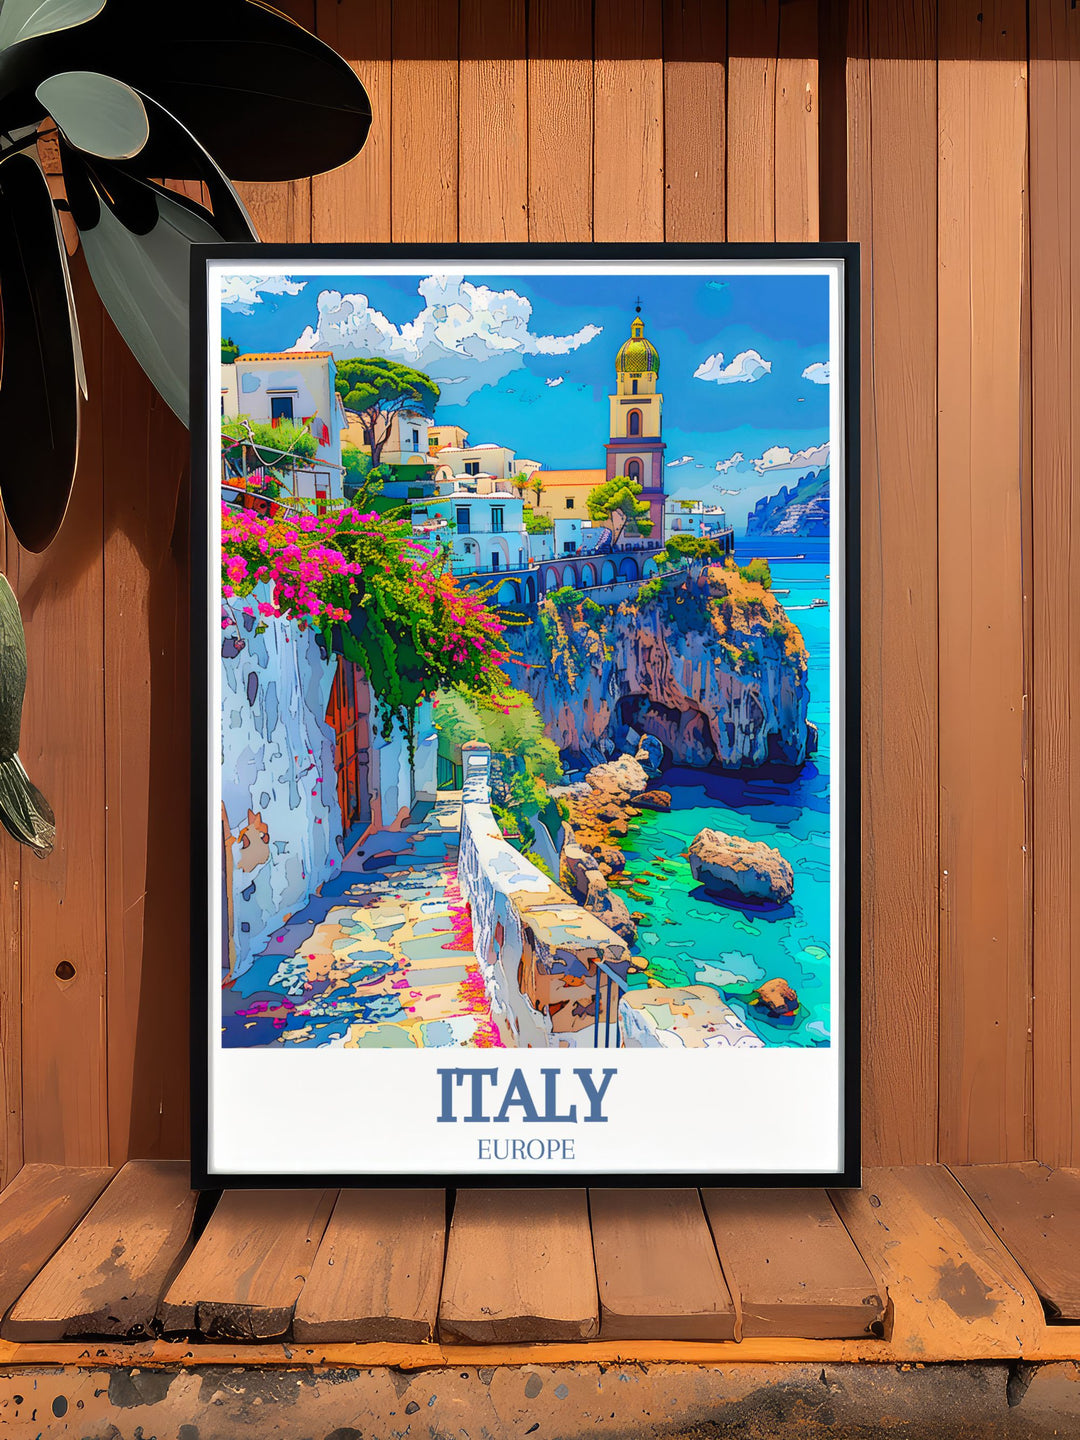 Highlighting the Amalfi Coasts serene waters and the Campanile Bell Towers Gothic architecture, this poster is a perfect addition to any home decor, celebrating Italys timeless allure.